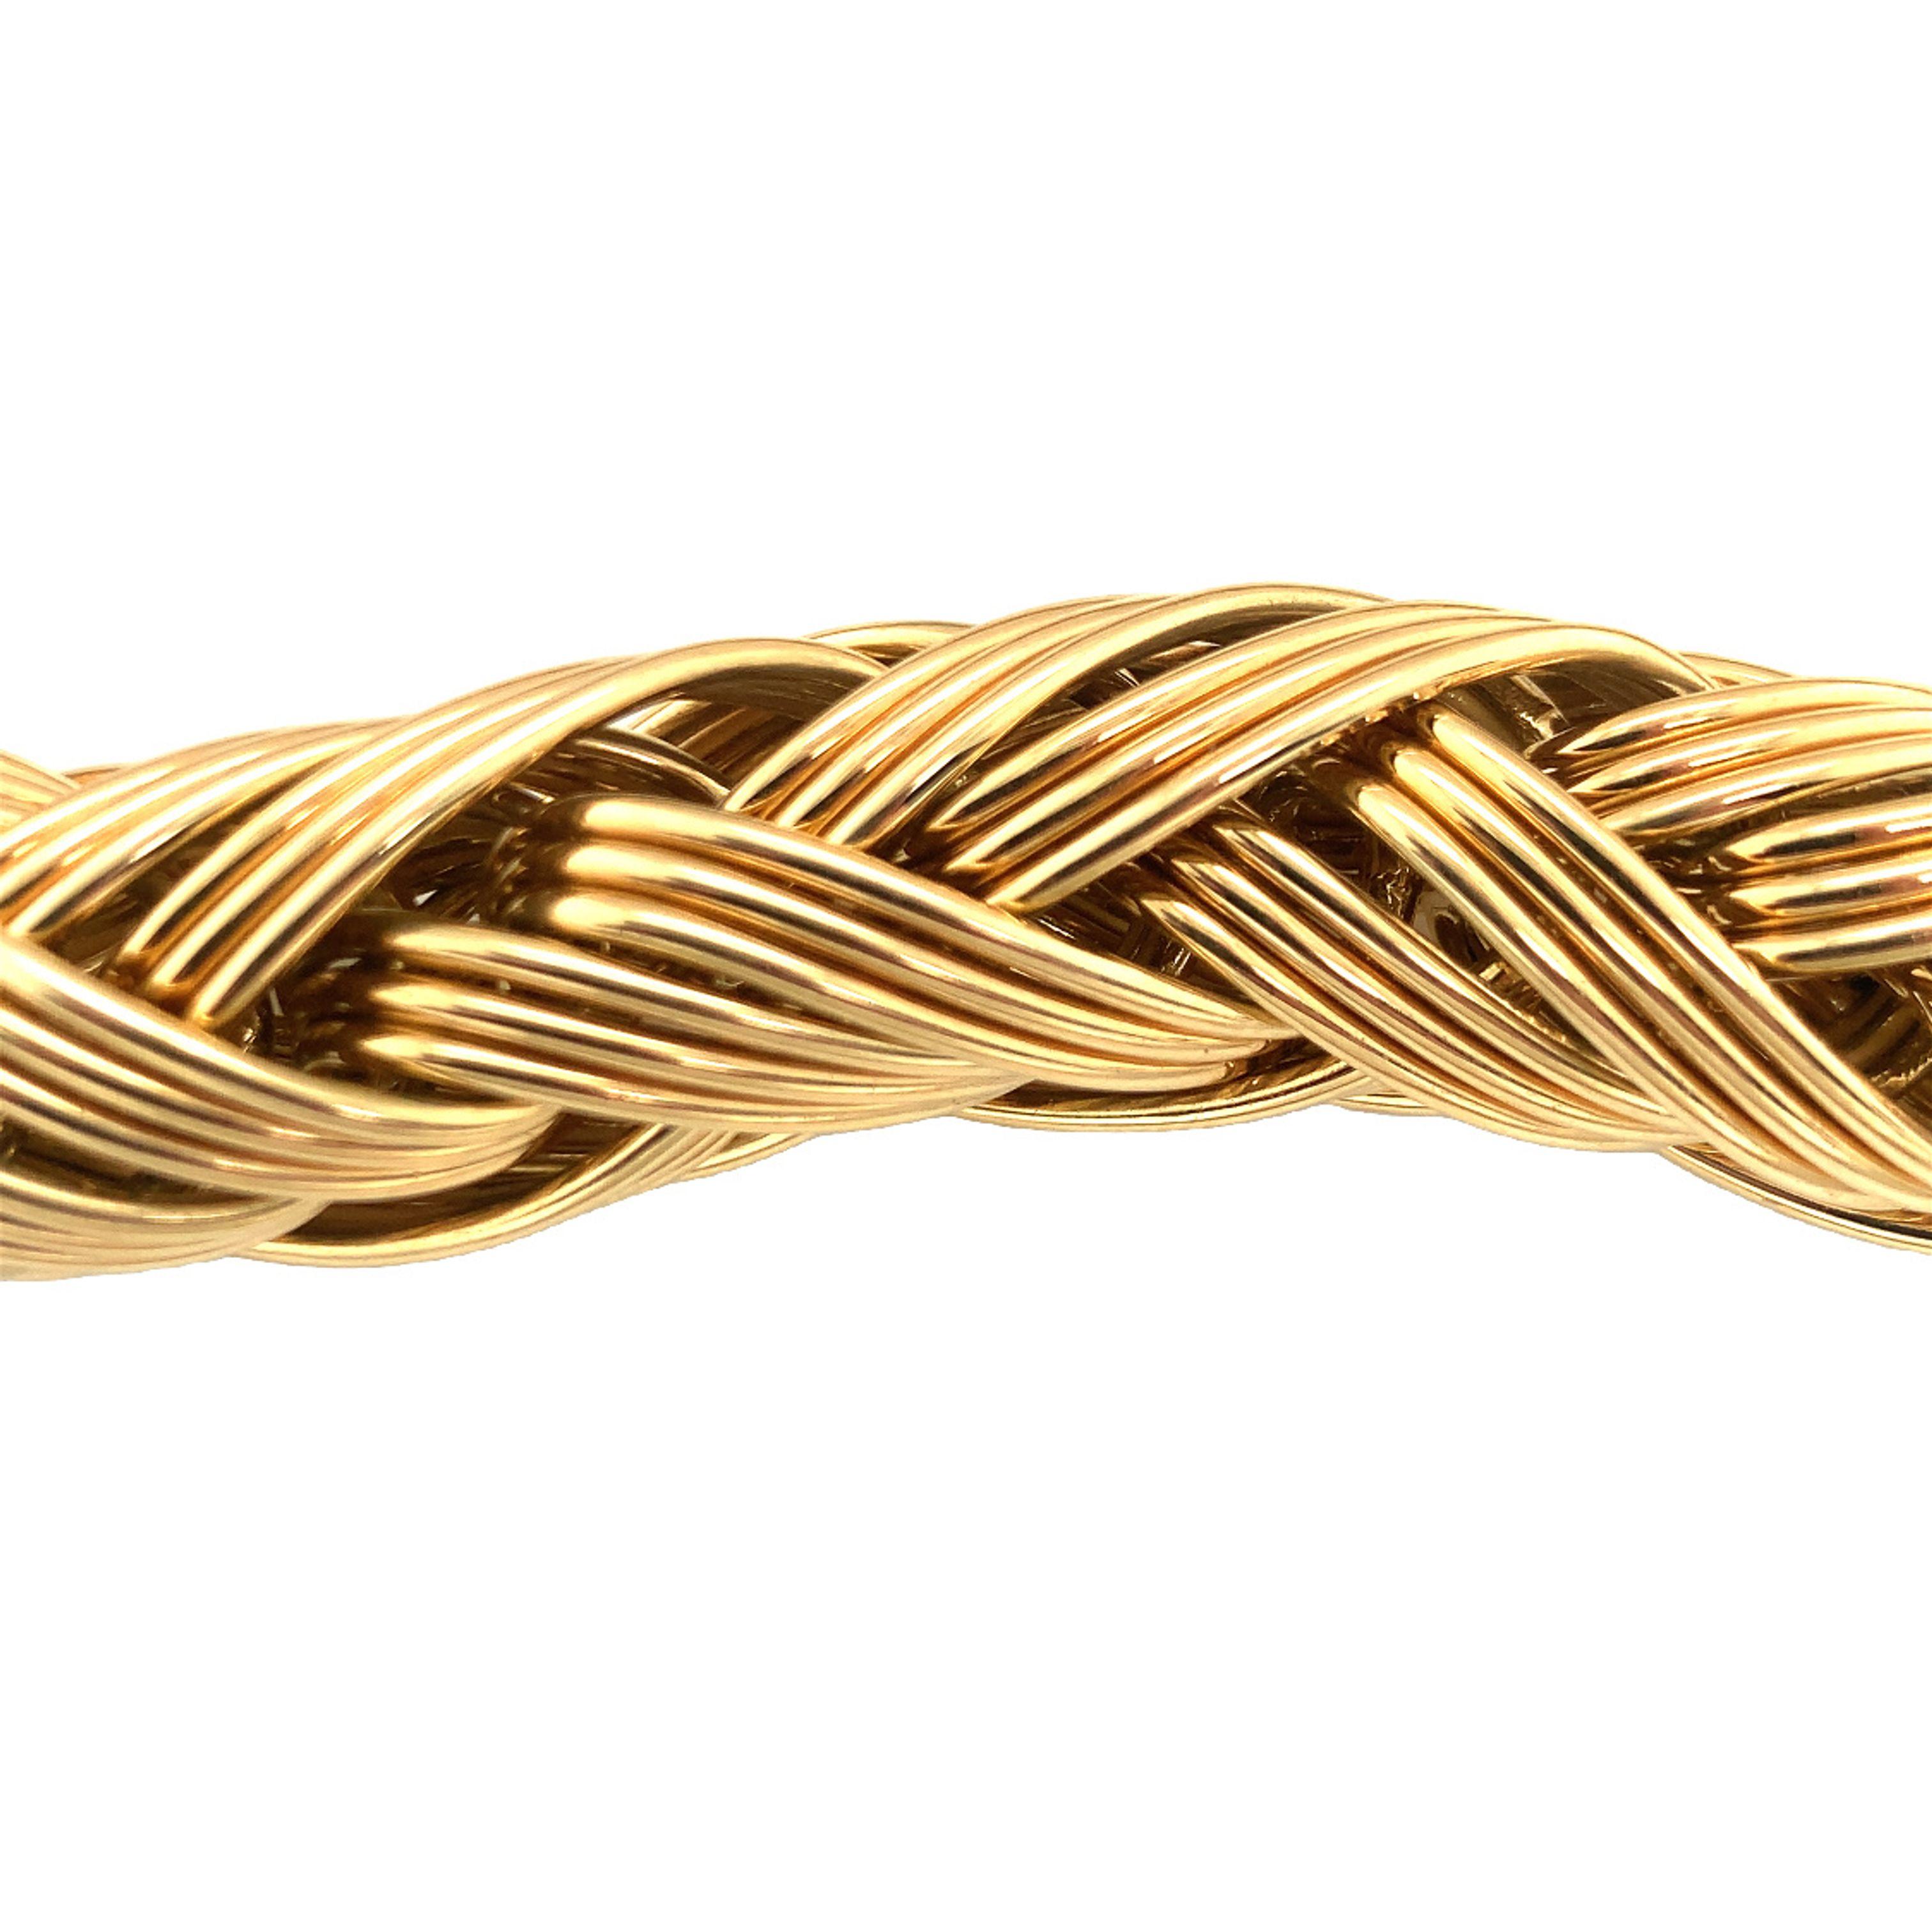 One woven, knotted link 18K yellow gold necklace with a tremendous tubular design measuring 17 millimeters wide. High polish, well built finish.

Immense, grand, imposing.

Metal: 18K yellow gold
Circa: 1960s
Stamp/Hallmark: Germany, 18Kt,